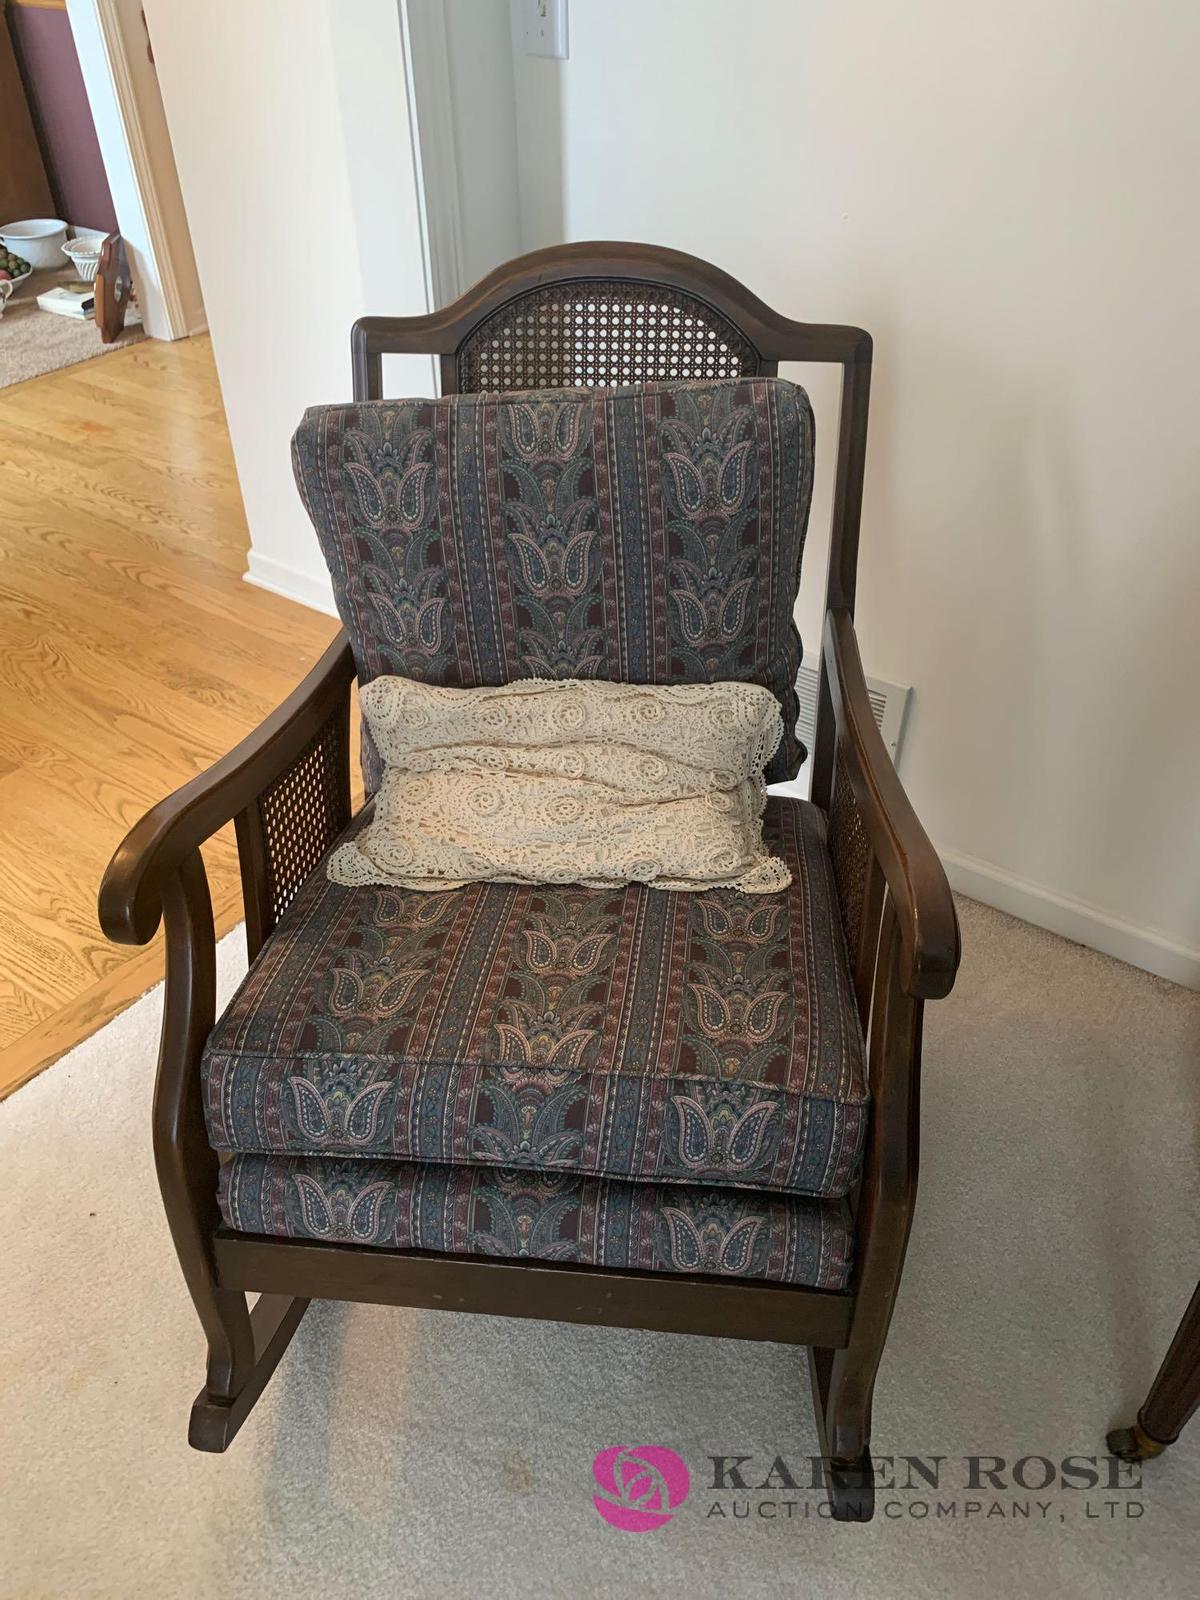 Cane back rocking chair with cushions